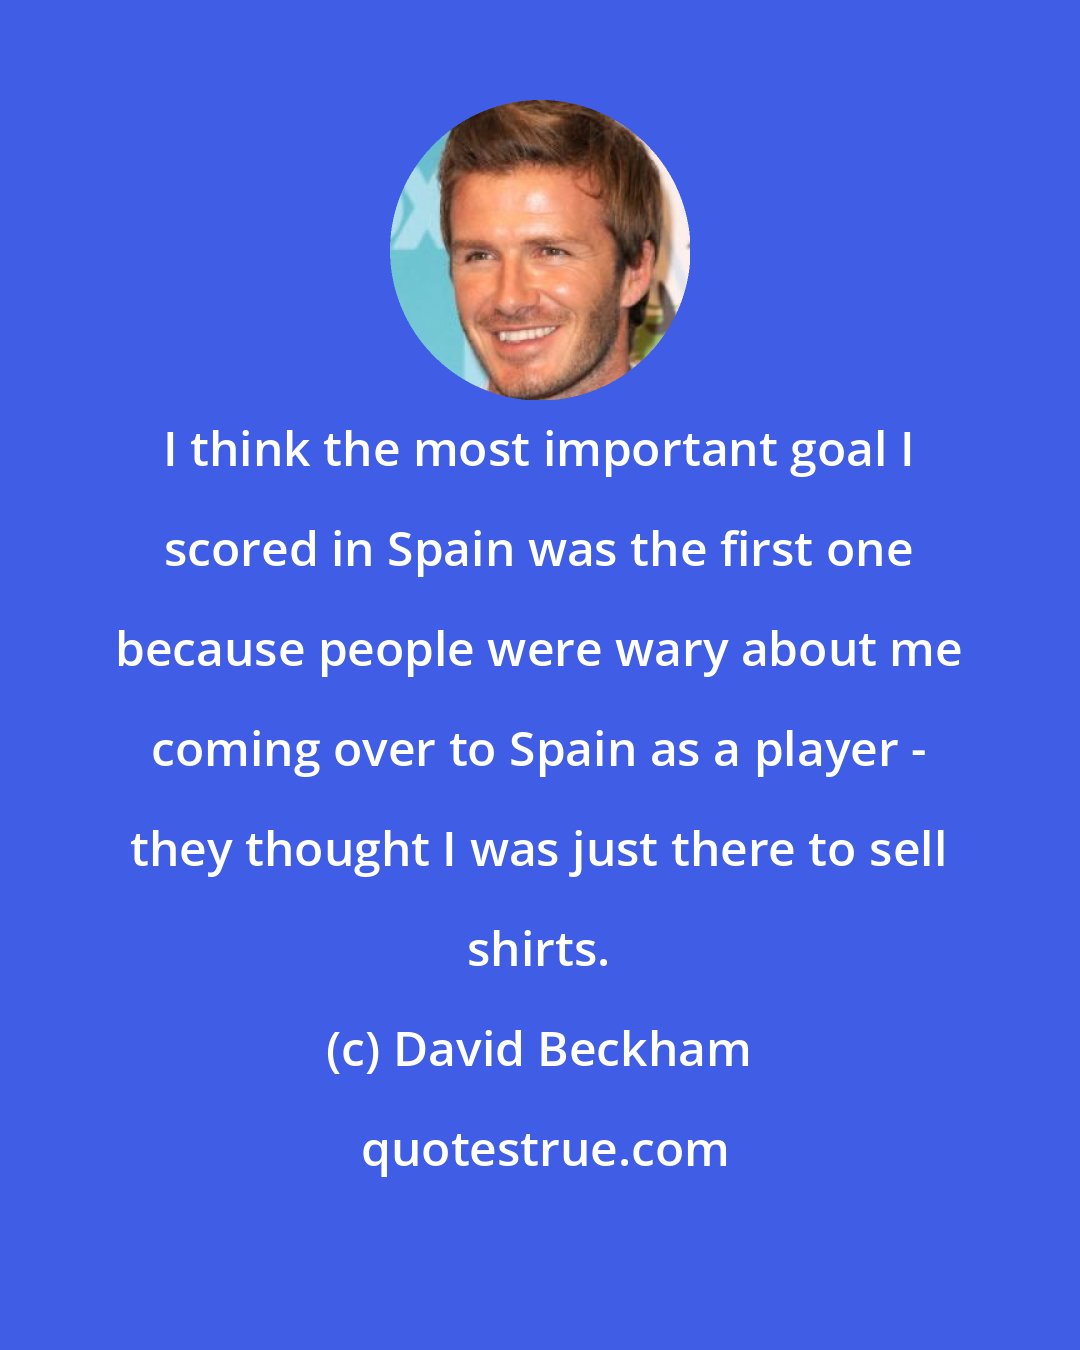 David Beckham: I think the most important goal I scored in Spain was the first one because people were wary about me coming over to Spain as a player - they thought I was just there to sell shirts.